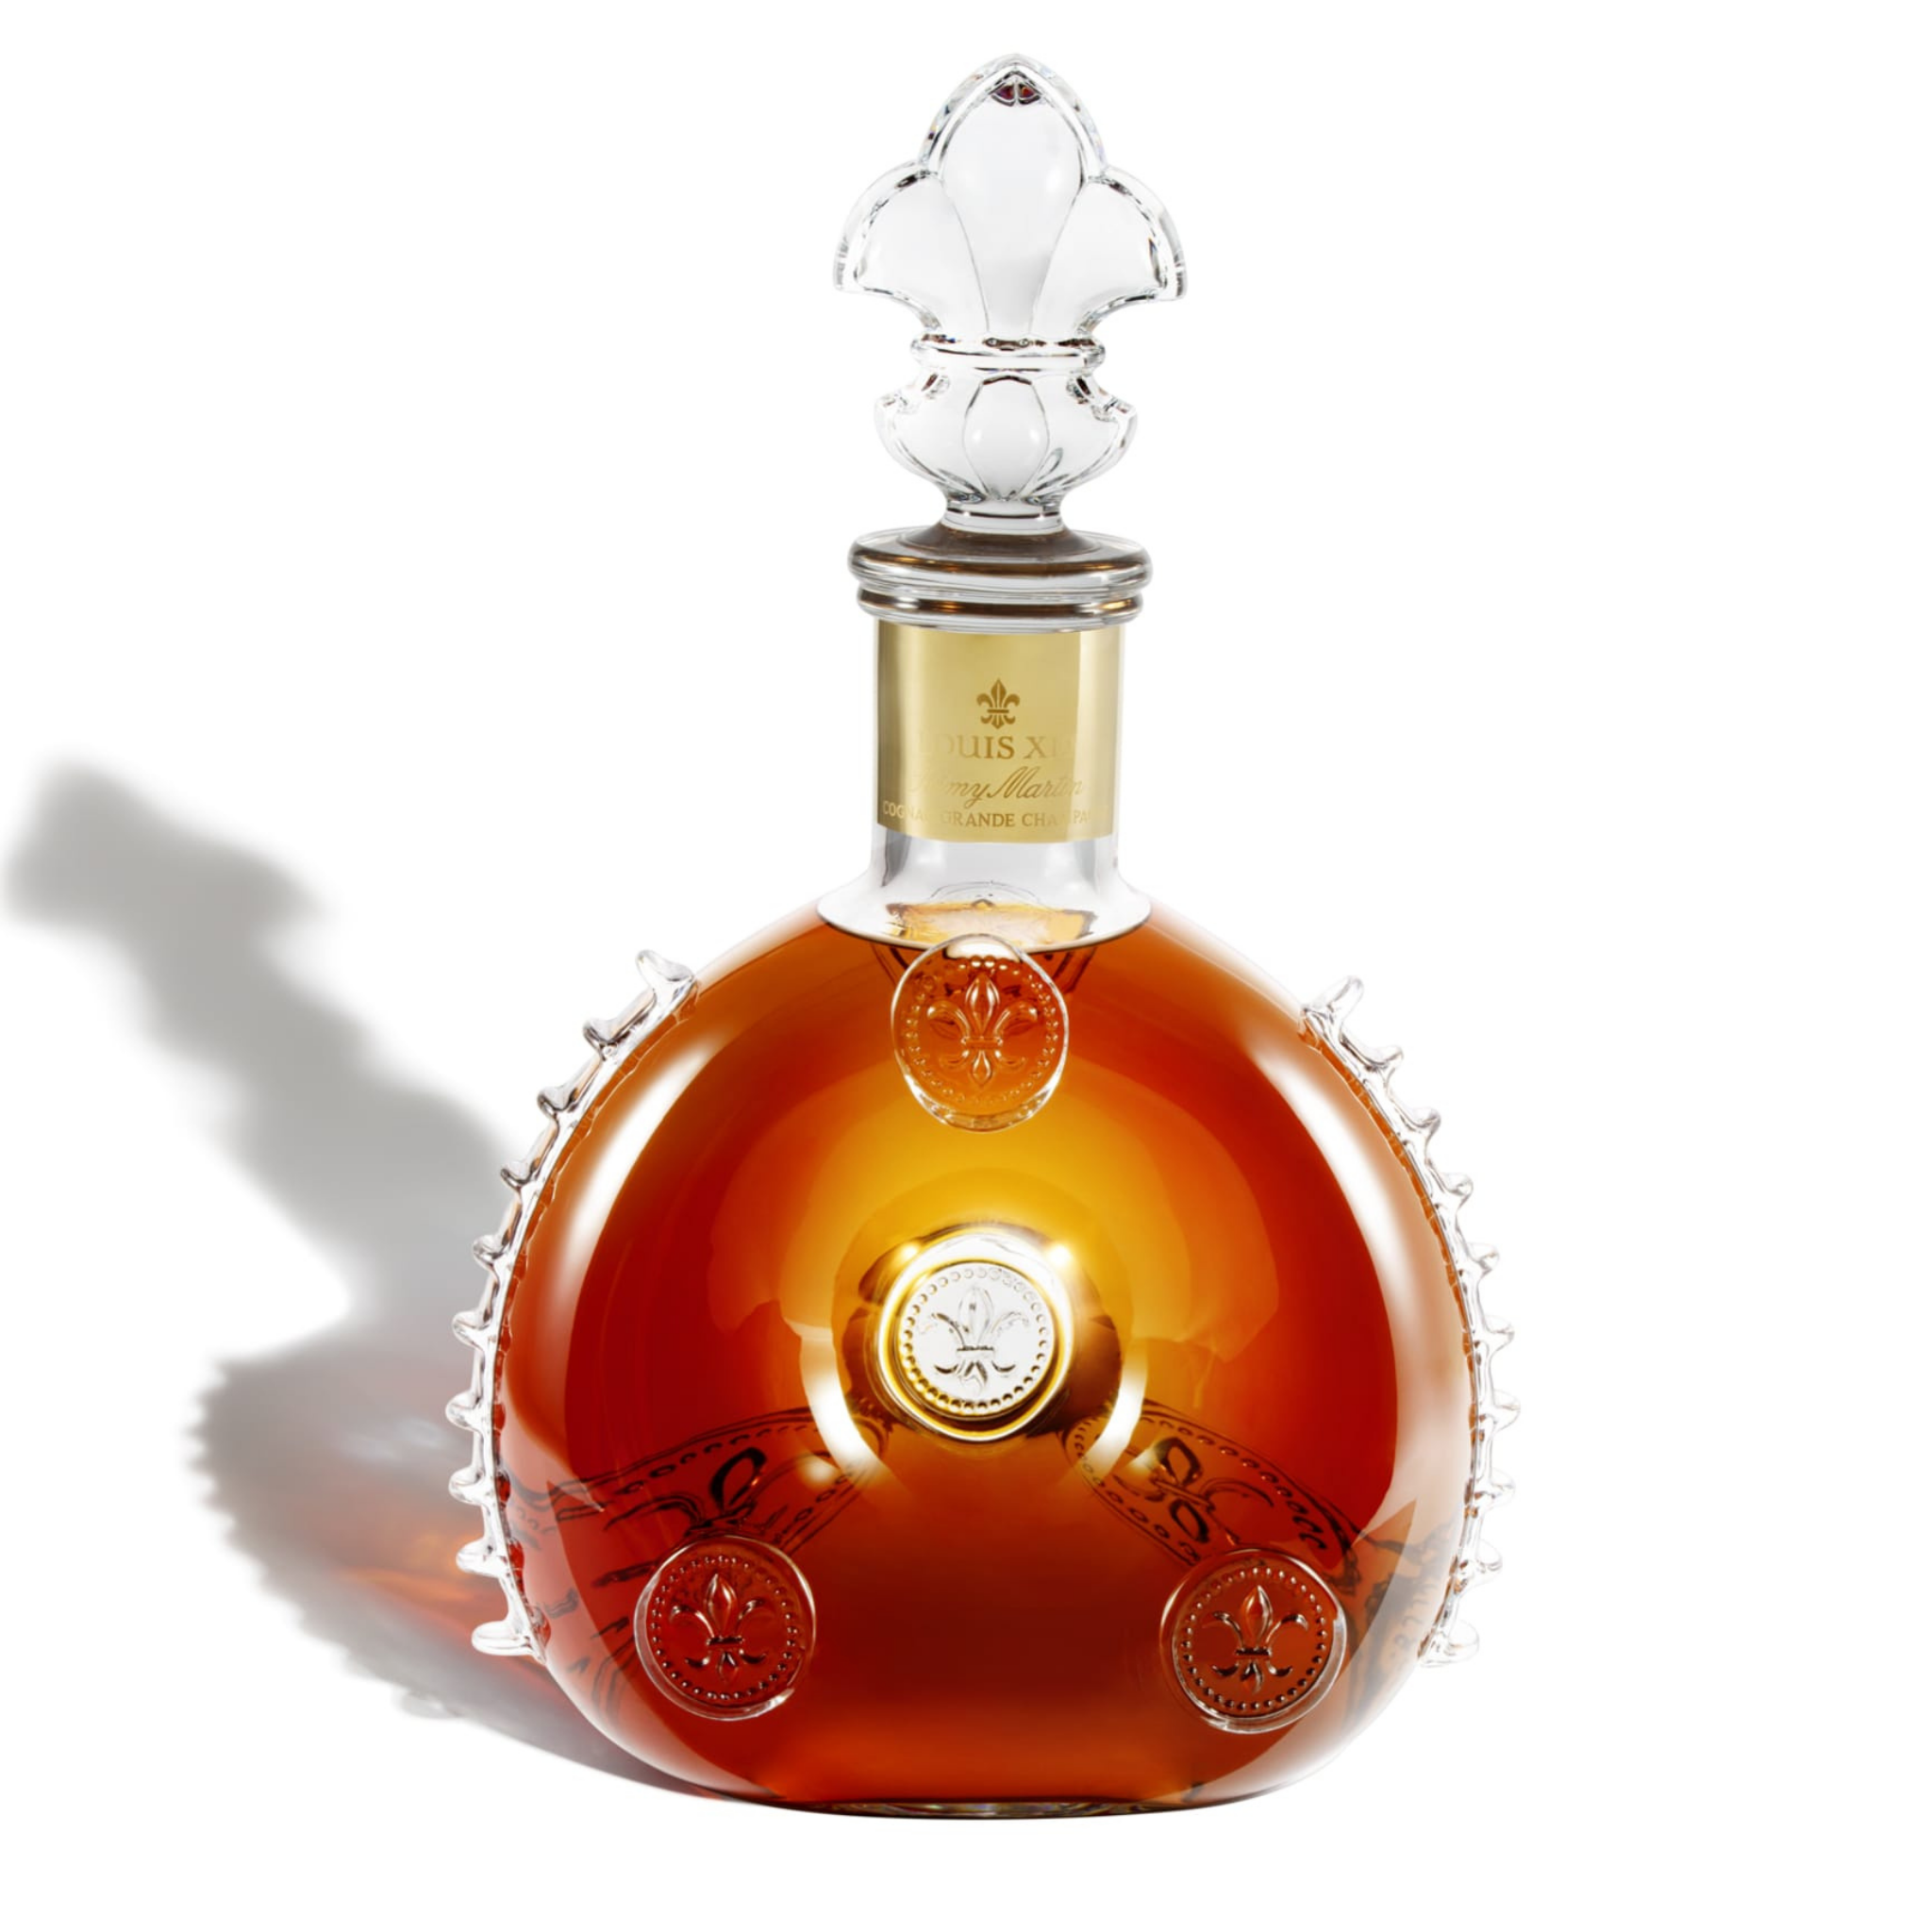 LOUIS XIII Single Crystal Glass for tasting cognac - Official Website